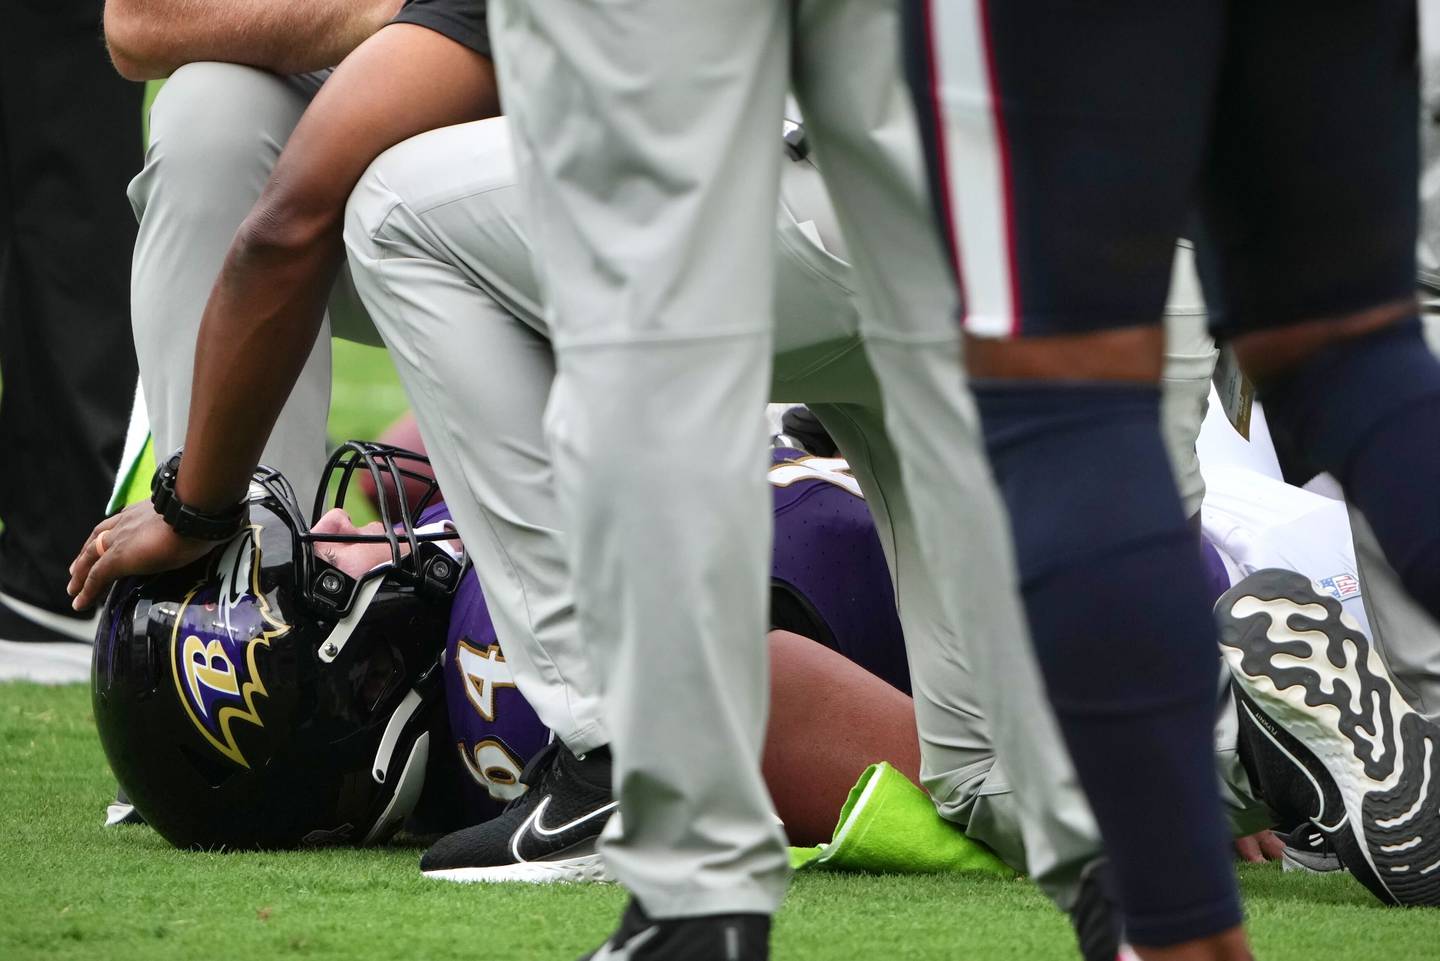 Baltimore Ravens center Tyler Linderbaum is injured on a play in the fourth quarter against the Houston Texans at M&T Bank Stadium.